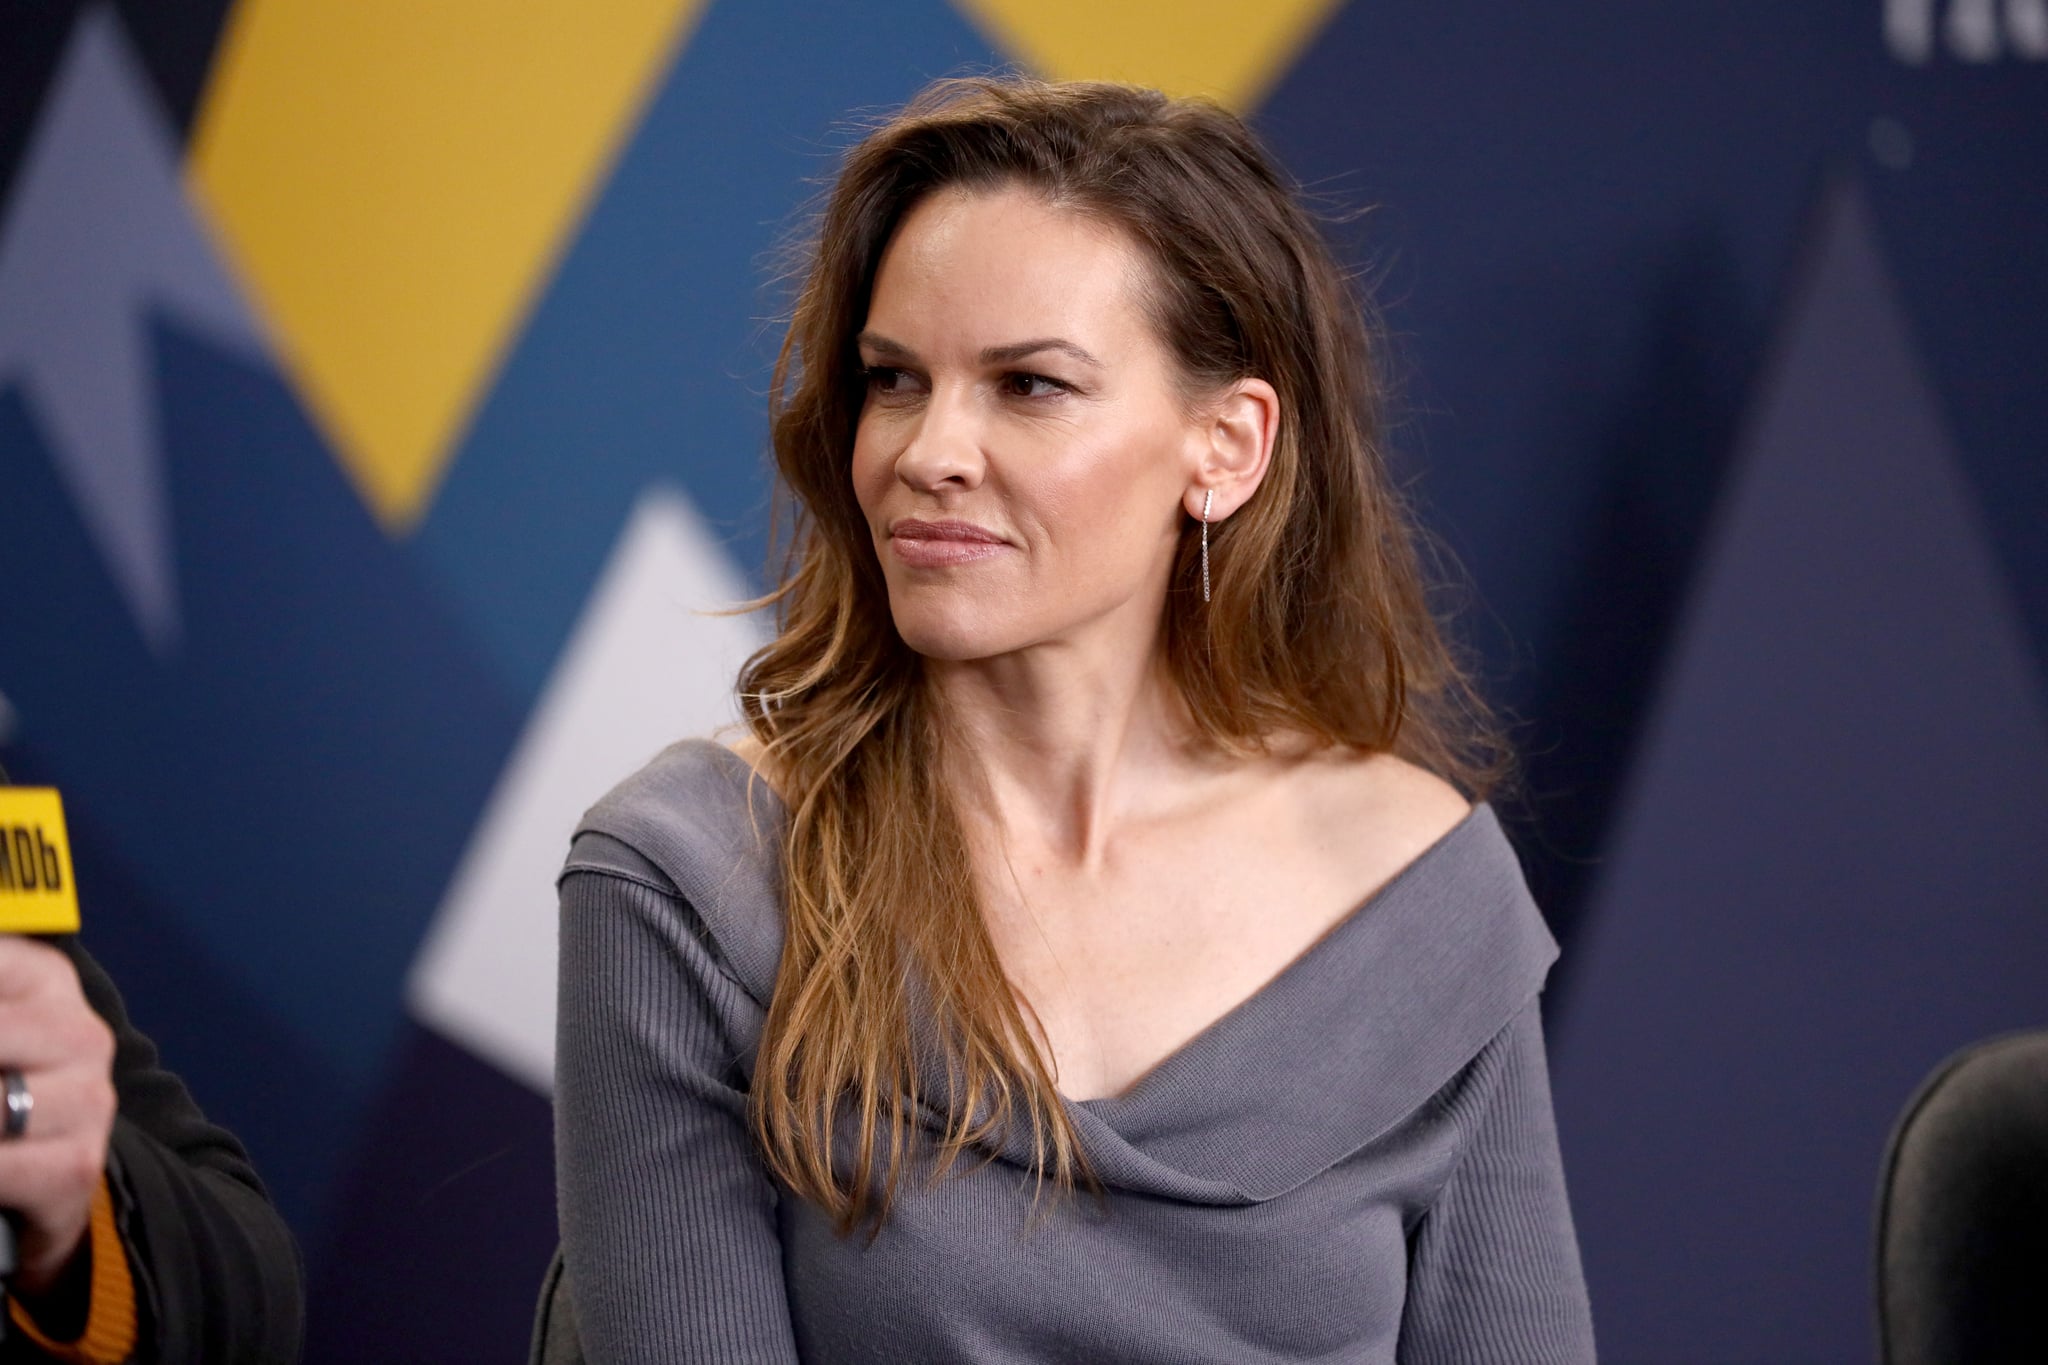 PARK CITY, UT - JANUARY 26:  Hilary Swank of 'I Am Mother' attends The IMDb Studio at Acura Festival Village on location at The 2019 Sundance Film Festival - Day 2  on January 26, 2019 in Park City, Utah.  (Photo by Rich Polk/Getty Images for IMDb)